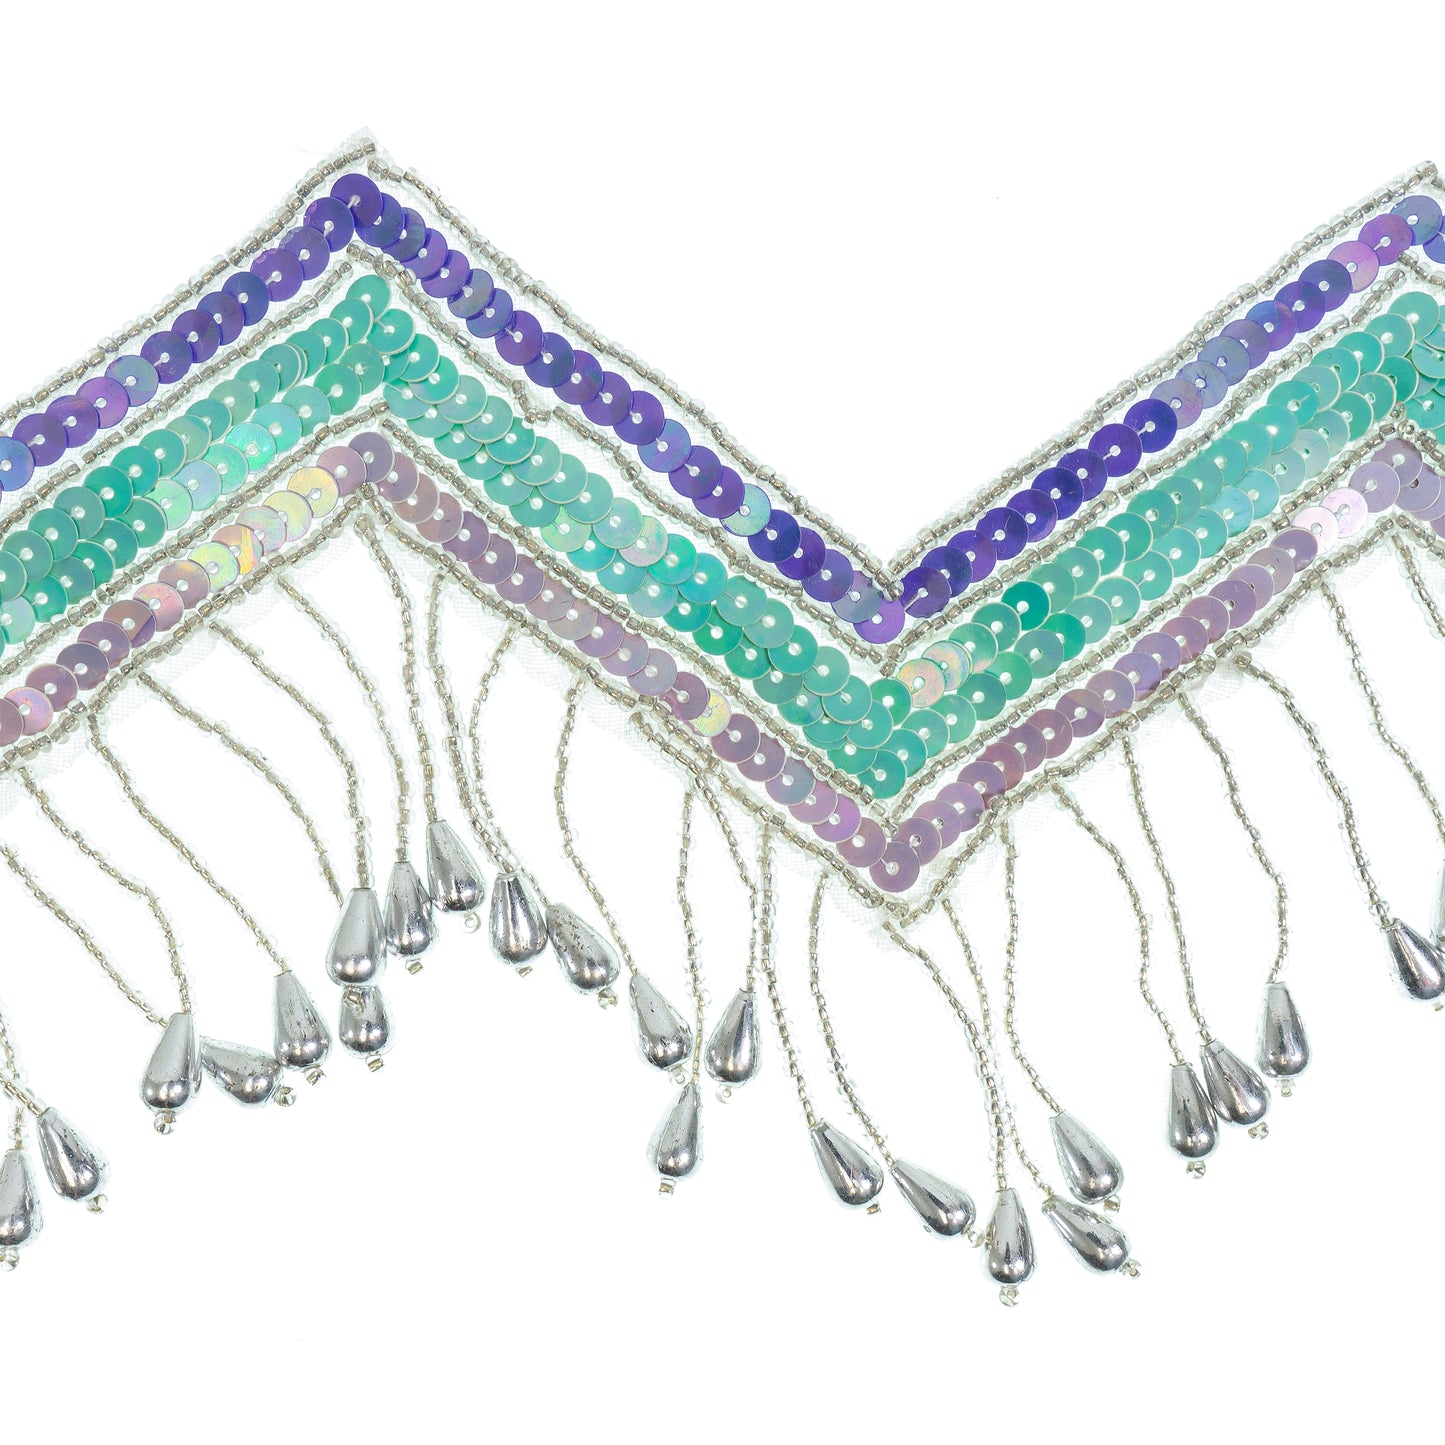 Chevron Sequin Beaded Fringe Trim (4 1/2") (Sold by the Yard)